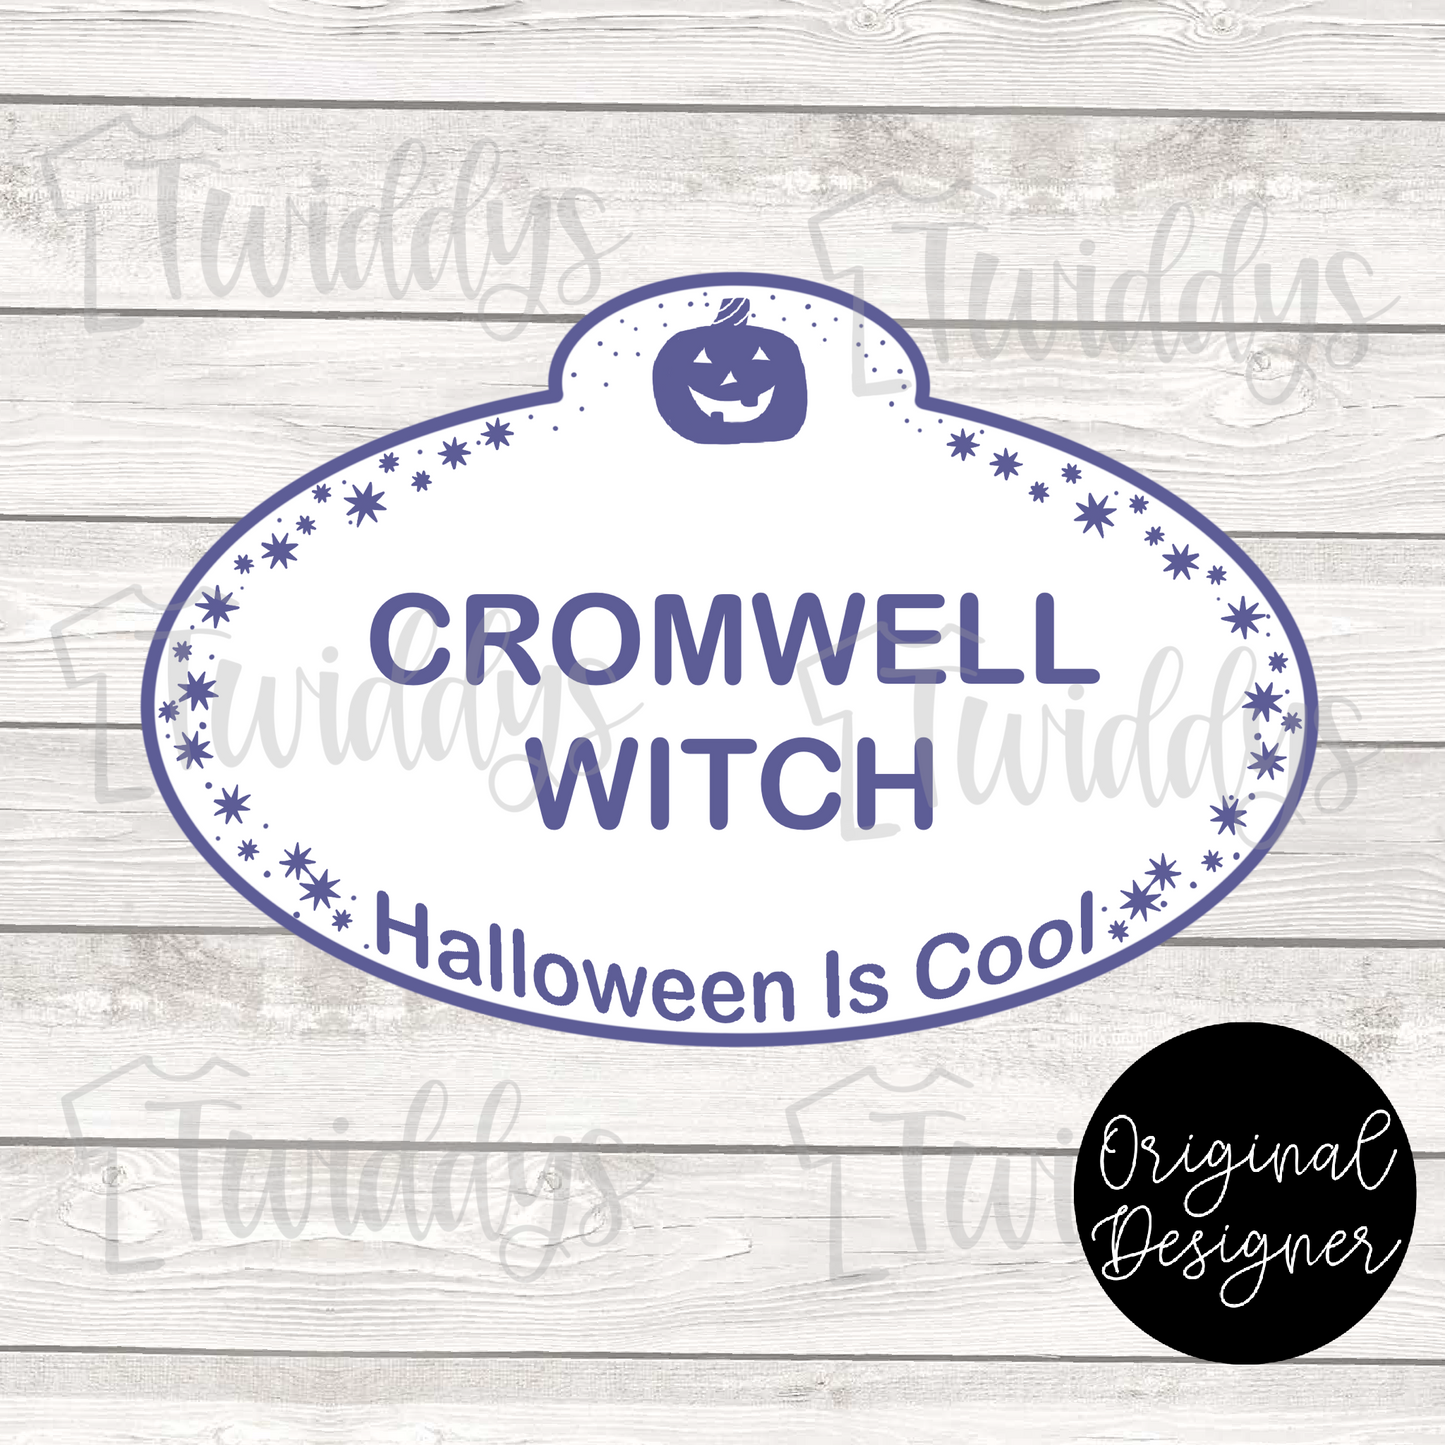 Cromwell Witch Name Tag Digital Download